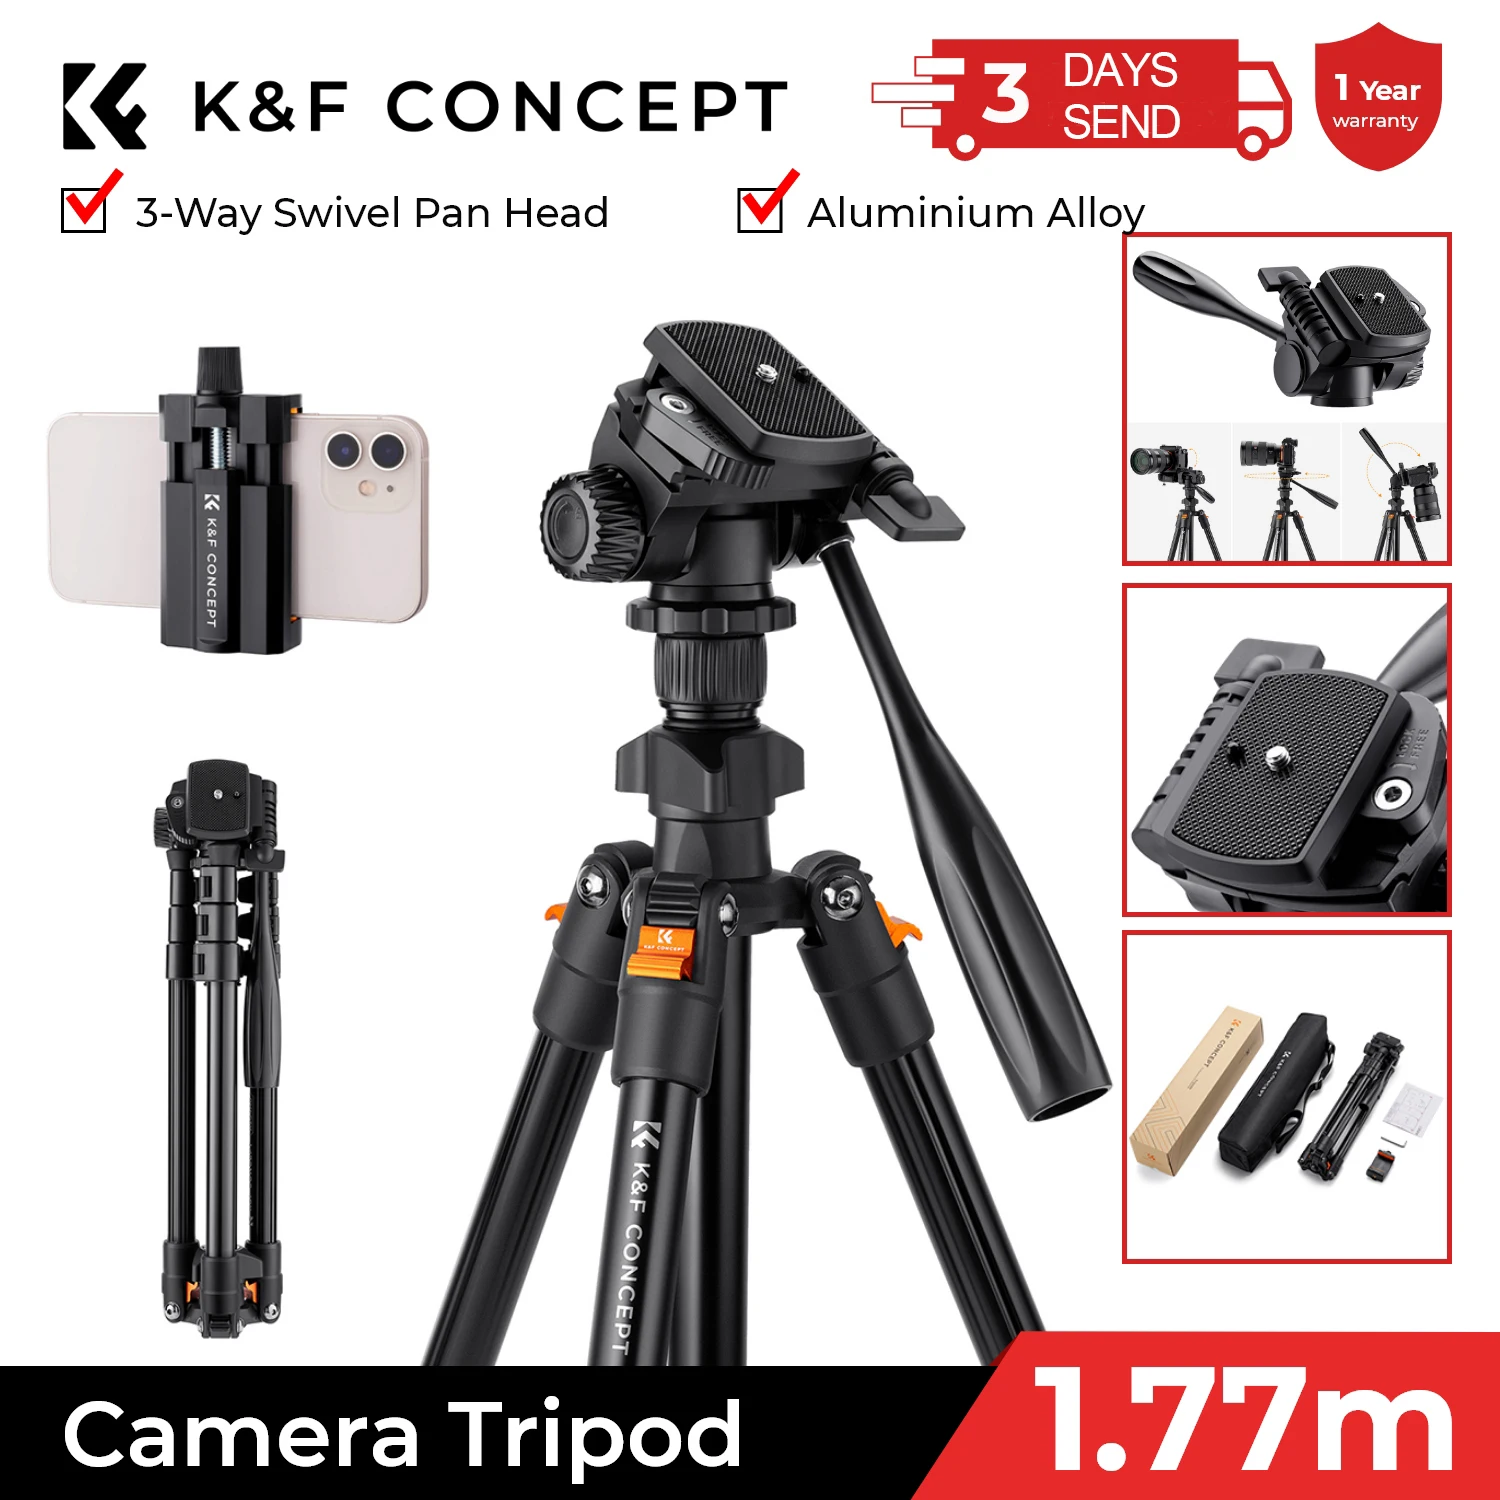 K&F Concept 64inch/162cm Video Tripod Lightweight Aluminum Tripods for Photography Live Streaming DSLR Camera Phone Holder Stand